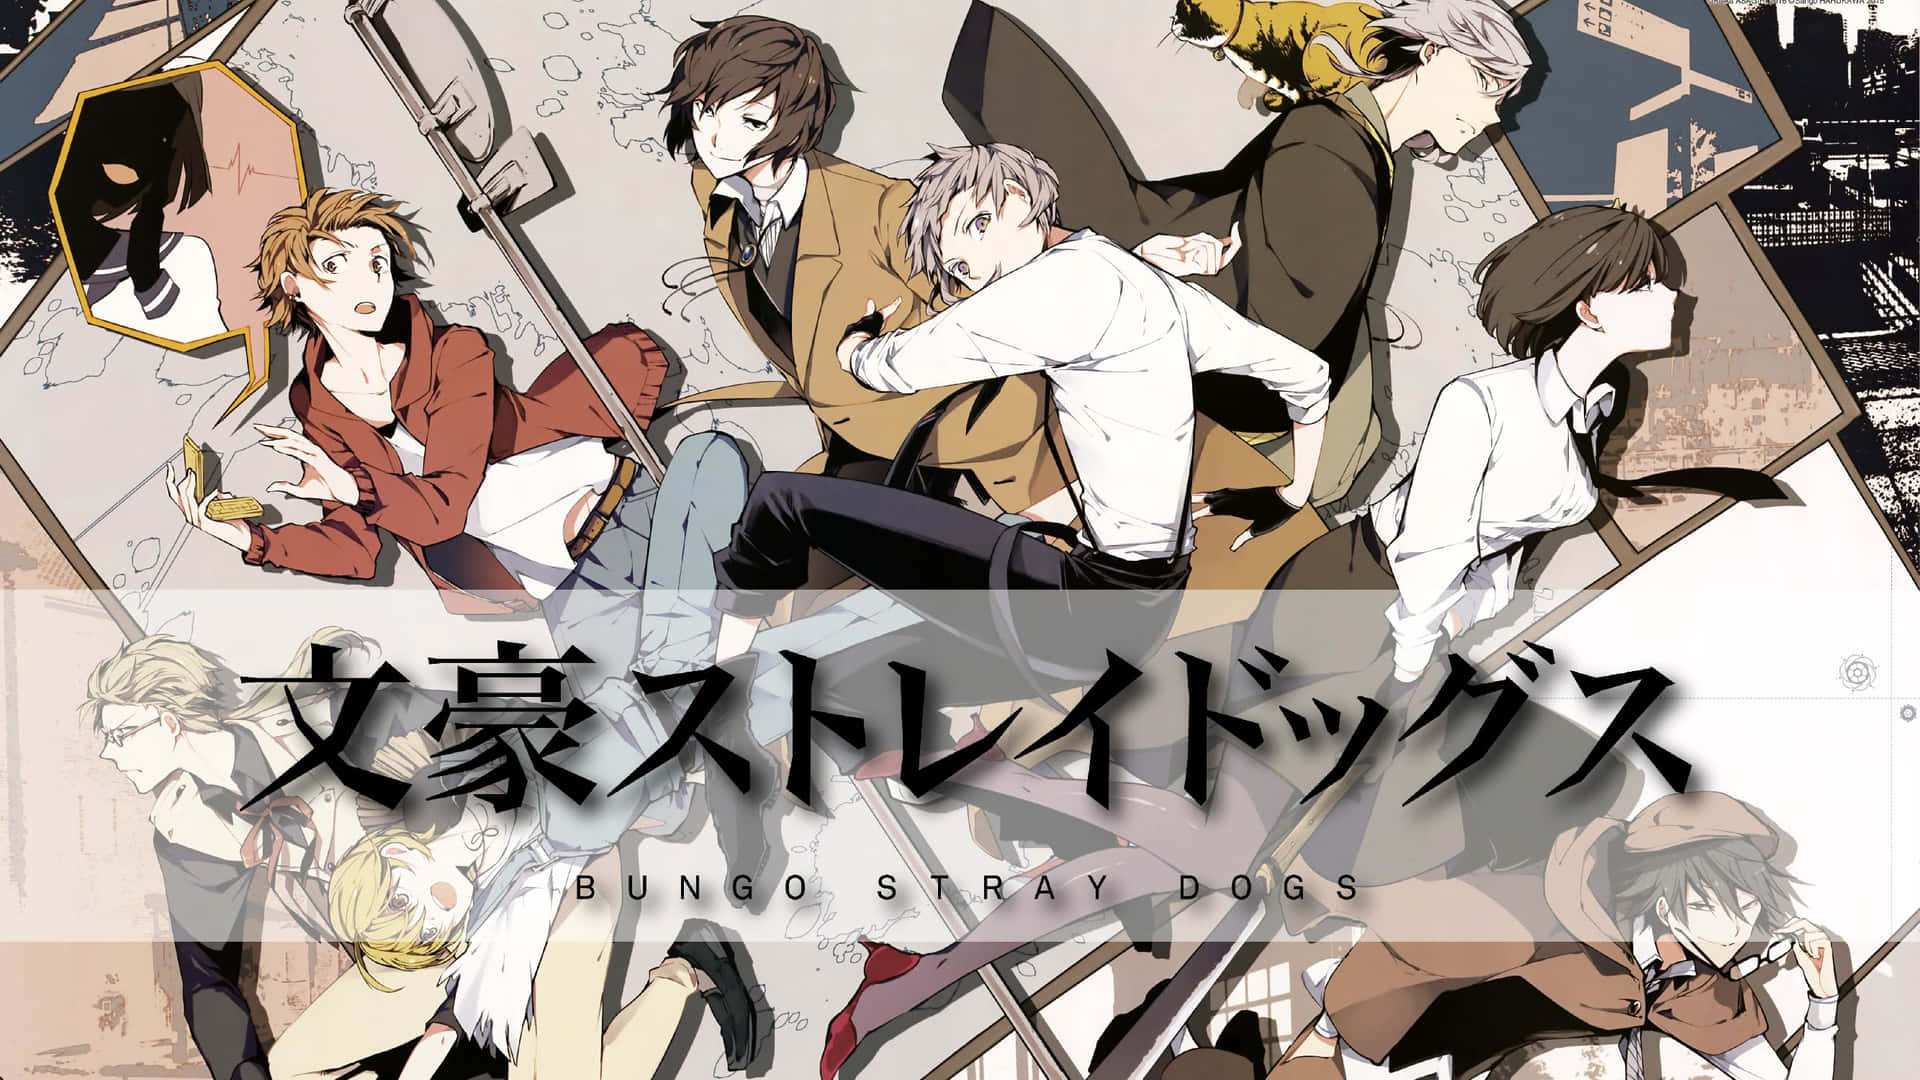 Uncover the mystery behind the Bungou Stray Dogs! Wallpaper